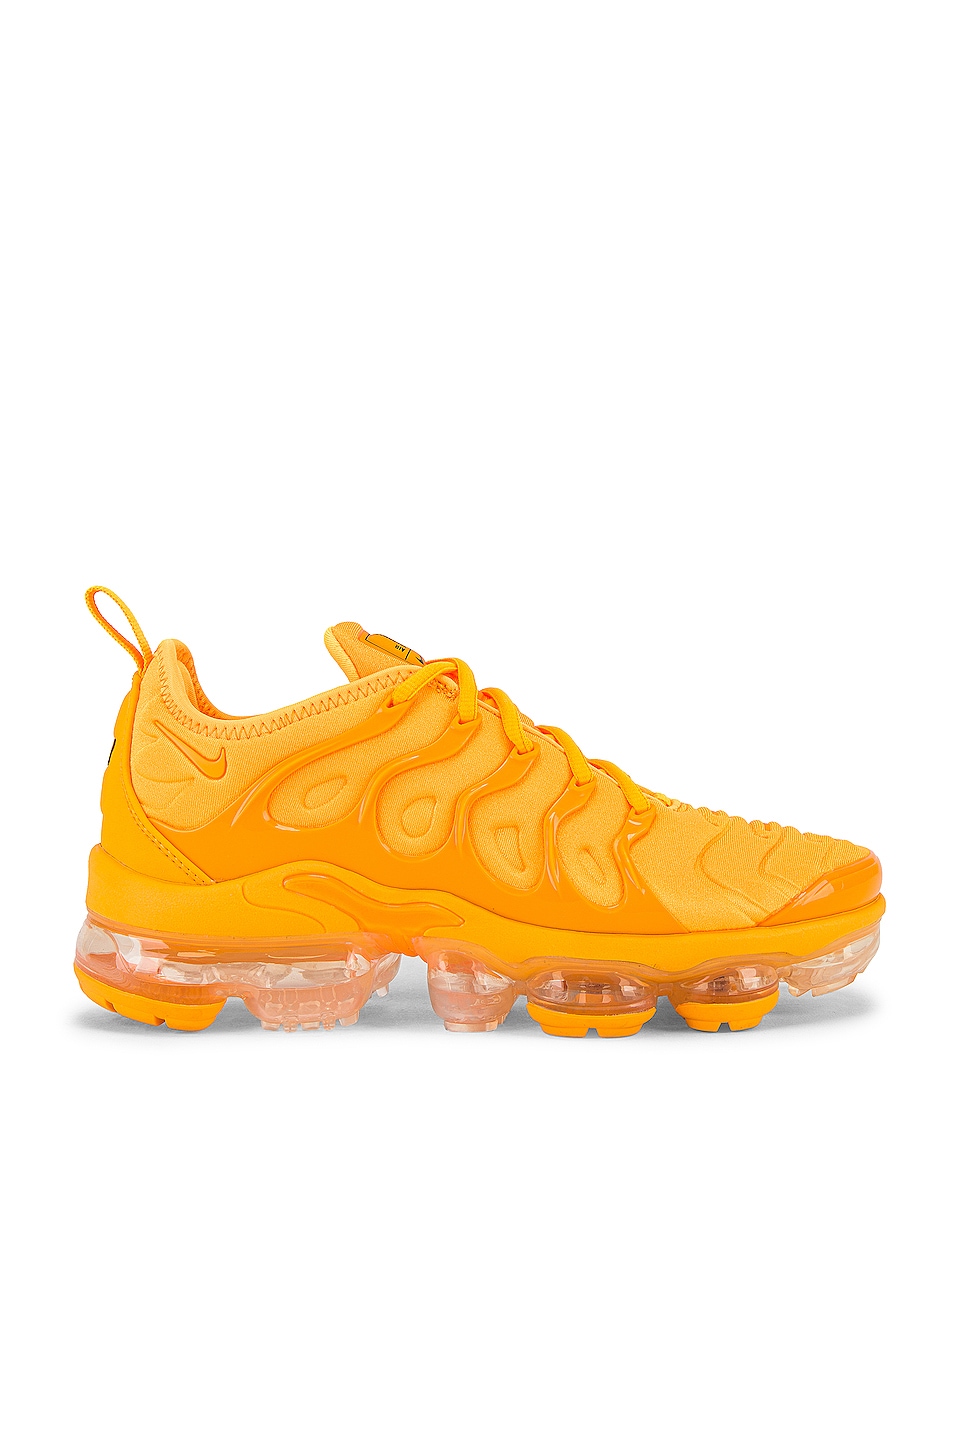 nike air vapormax plus afterpay- OFF 51 